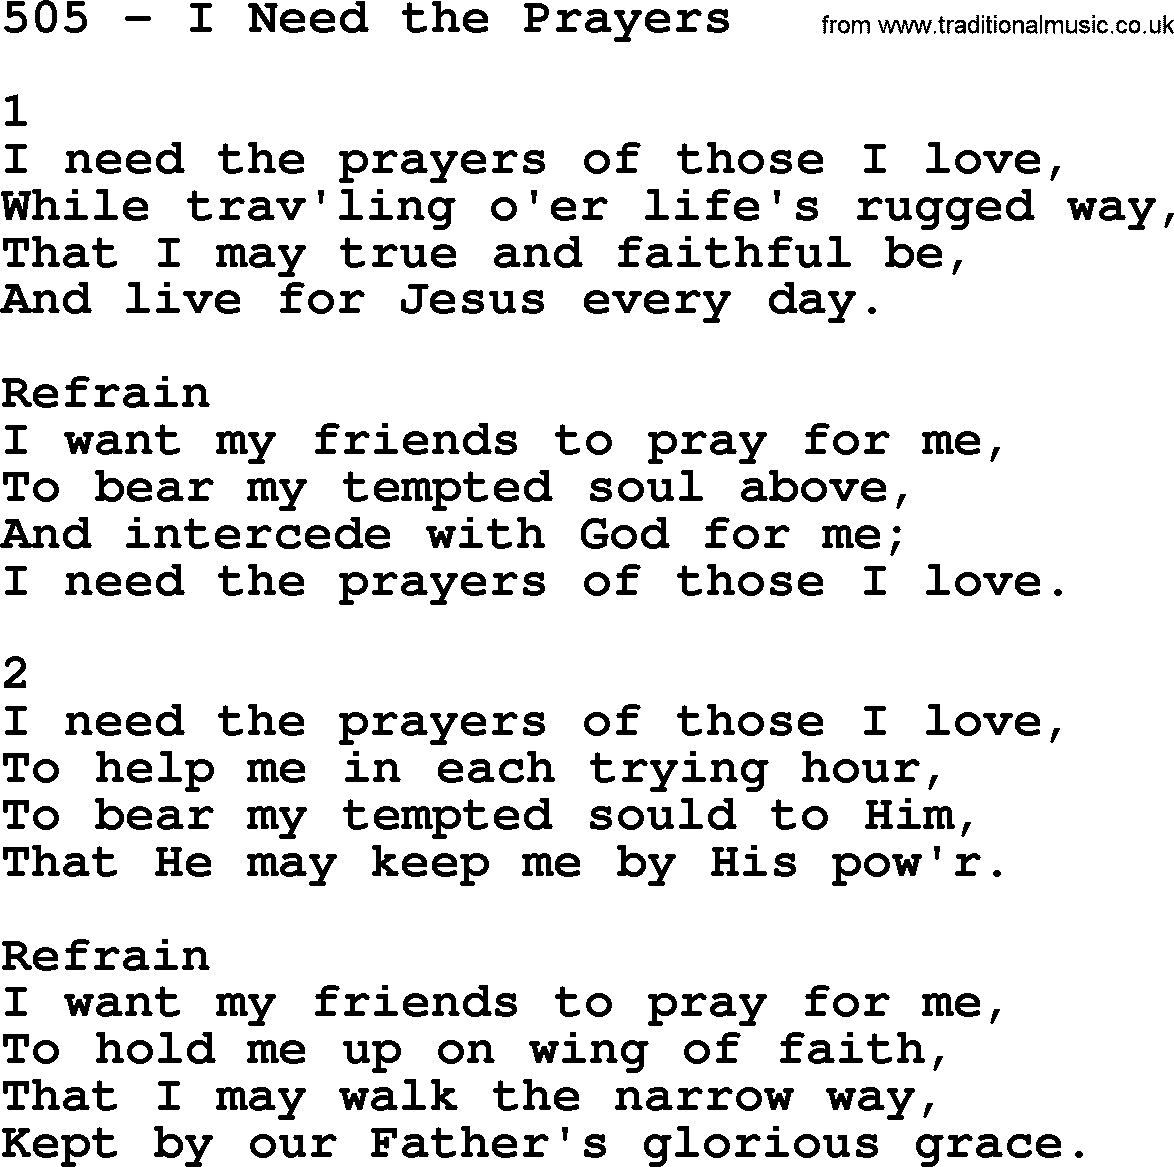 Complete Adventis Hymnal, title: 505-I Need The Prayers, with lyrics, midi, mp3, powerpoints(PPT) and PDF,